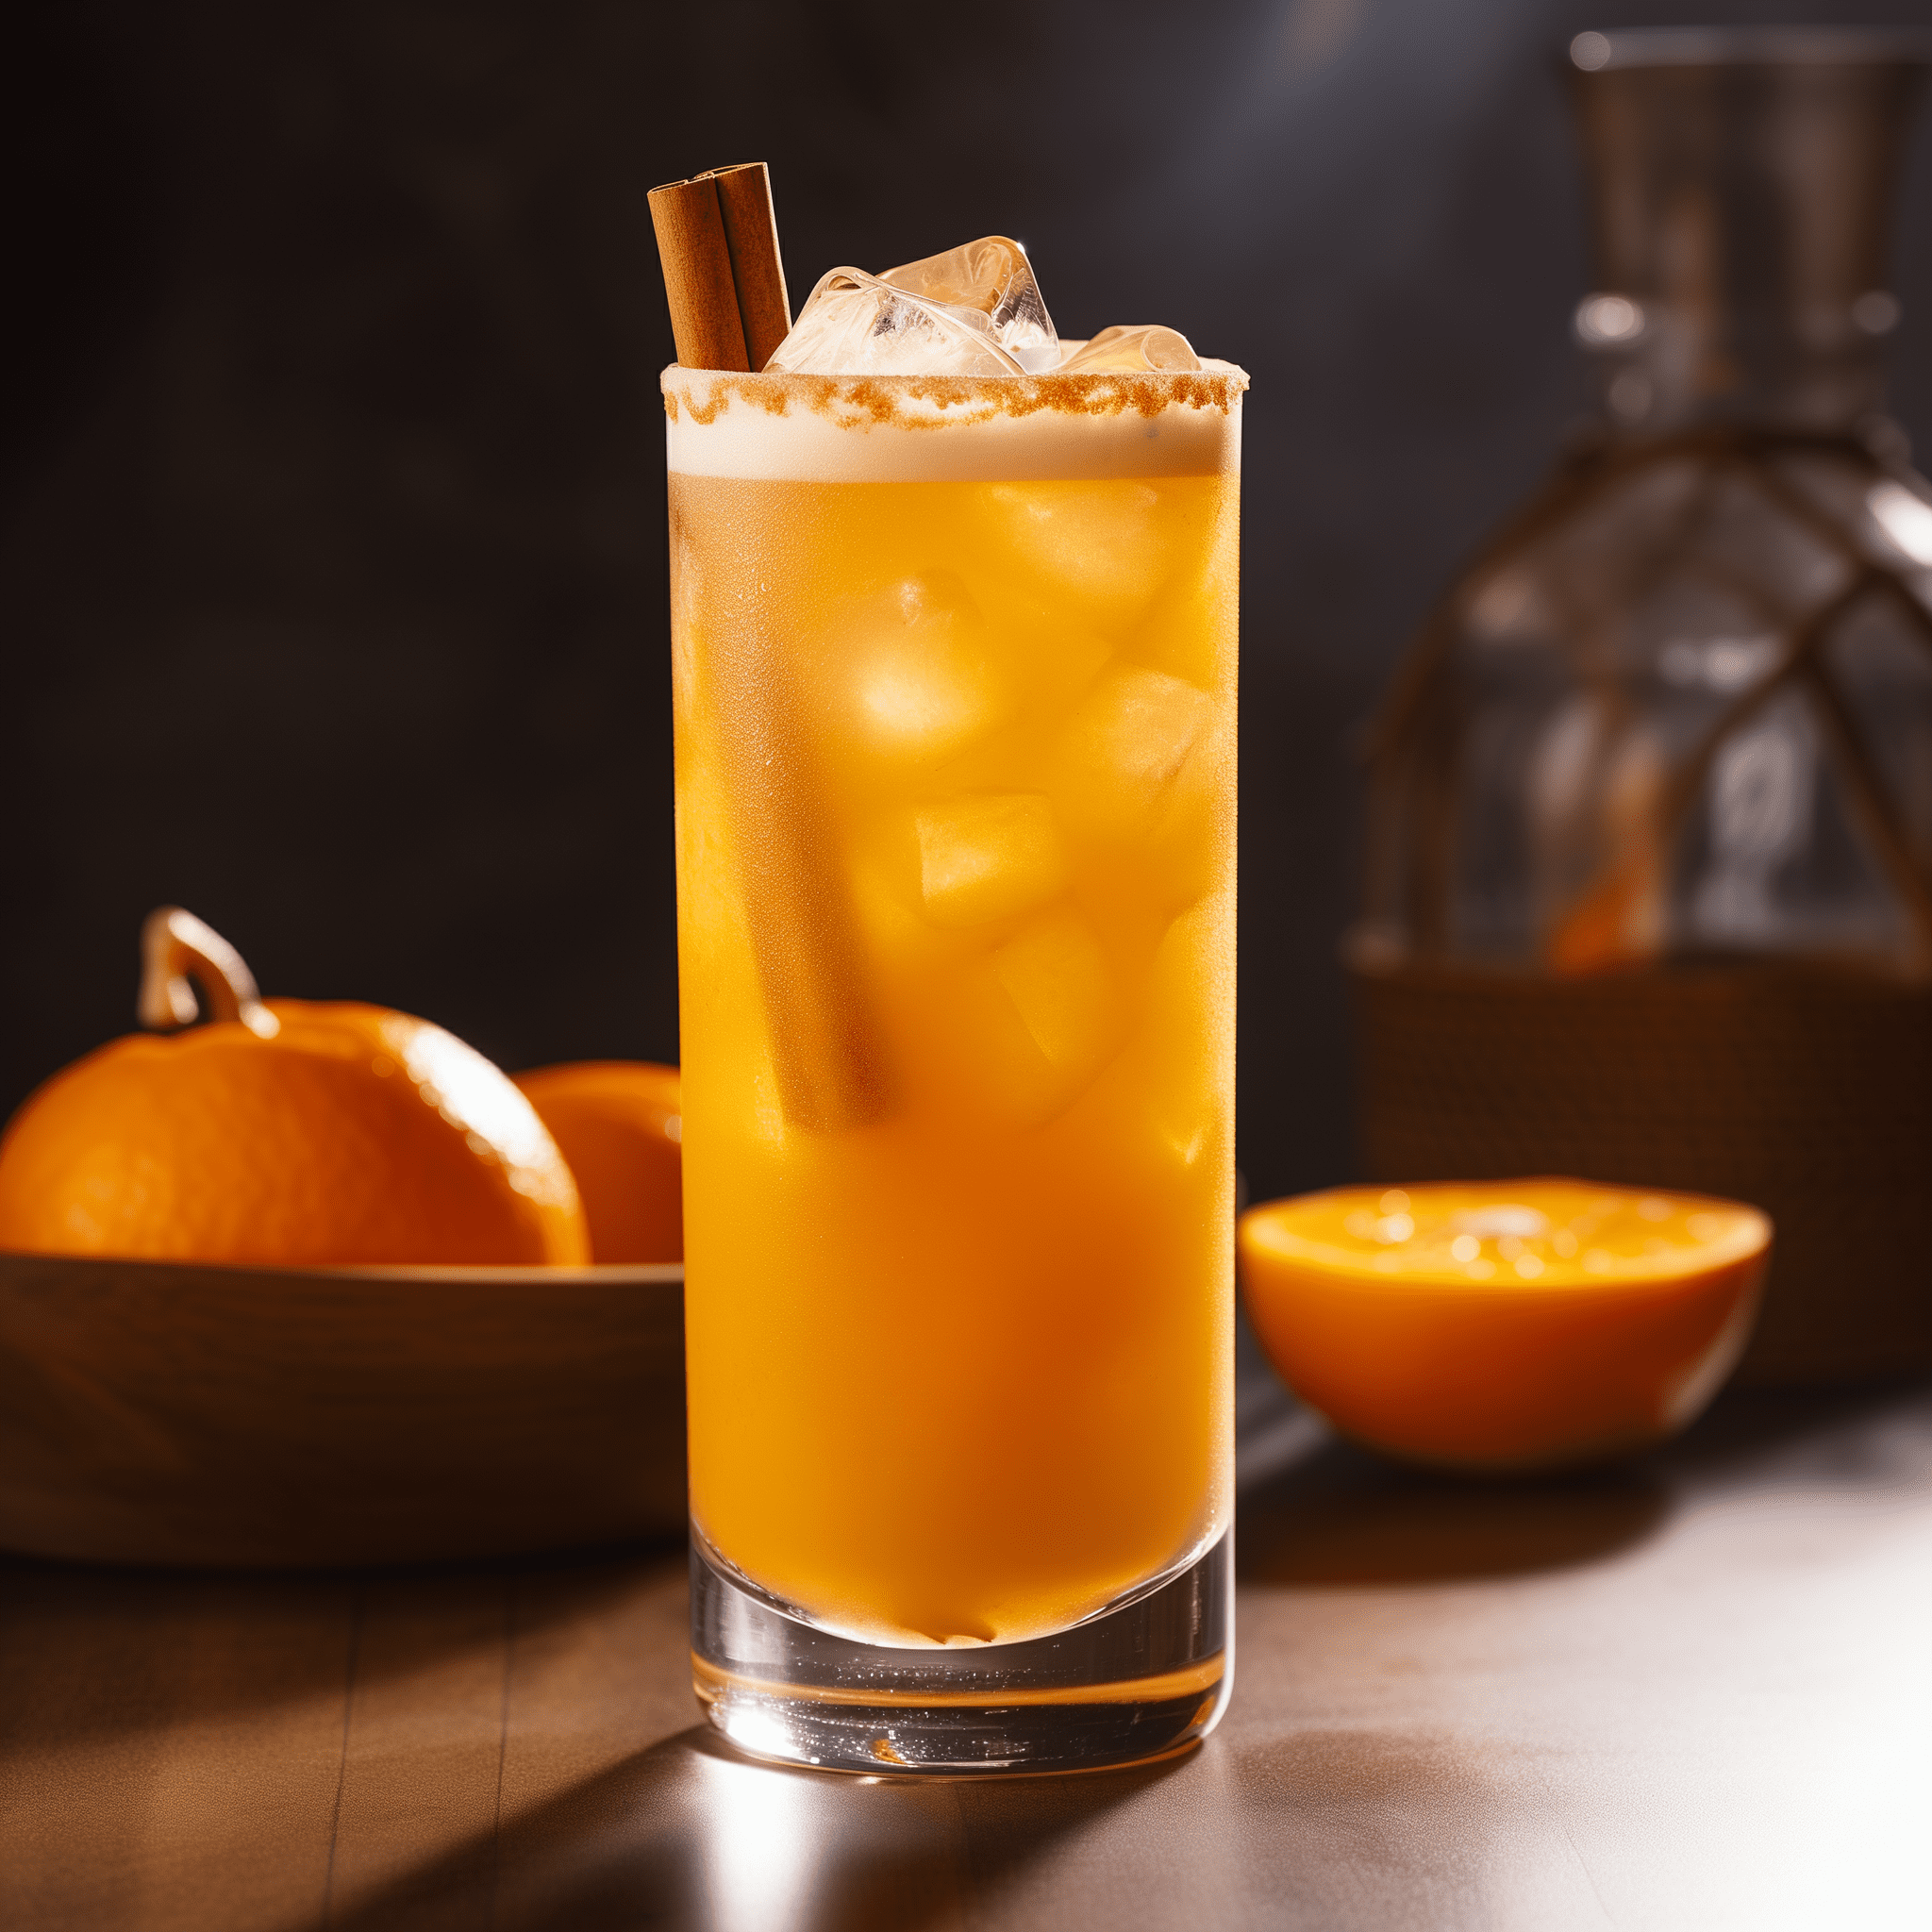 Drunk Pumpkin Cocktail Recipe - The Drunk Pumpkin offers a sweet and spicy taste profile, with the warmth of vodka complemented by the rich, aromatic pumpkin spice. The tonic water adds a slight bitterness and effervescence, while the orange food coloring gives it a festive look without altering the flavor.